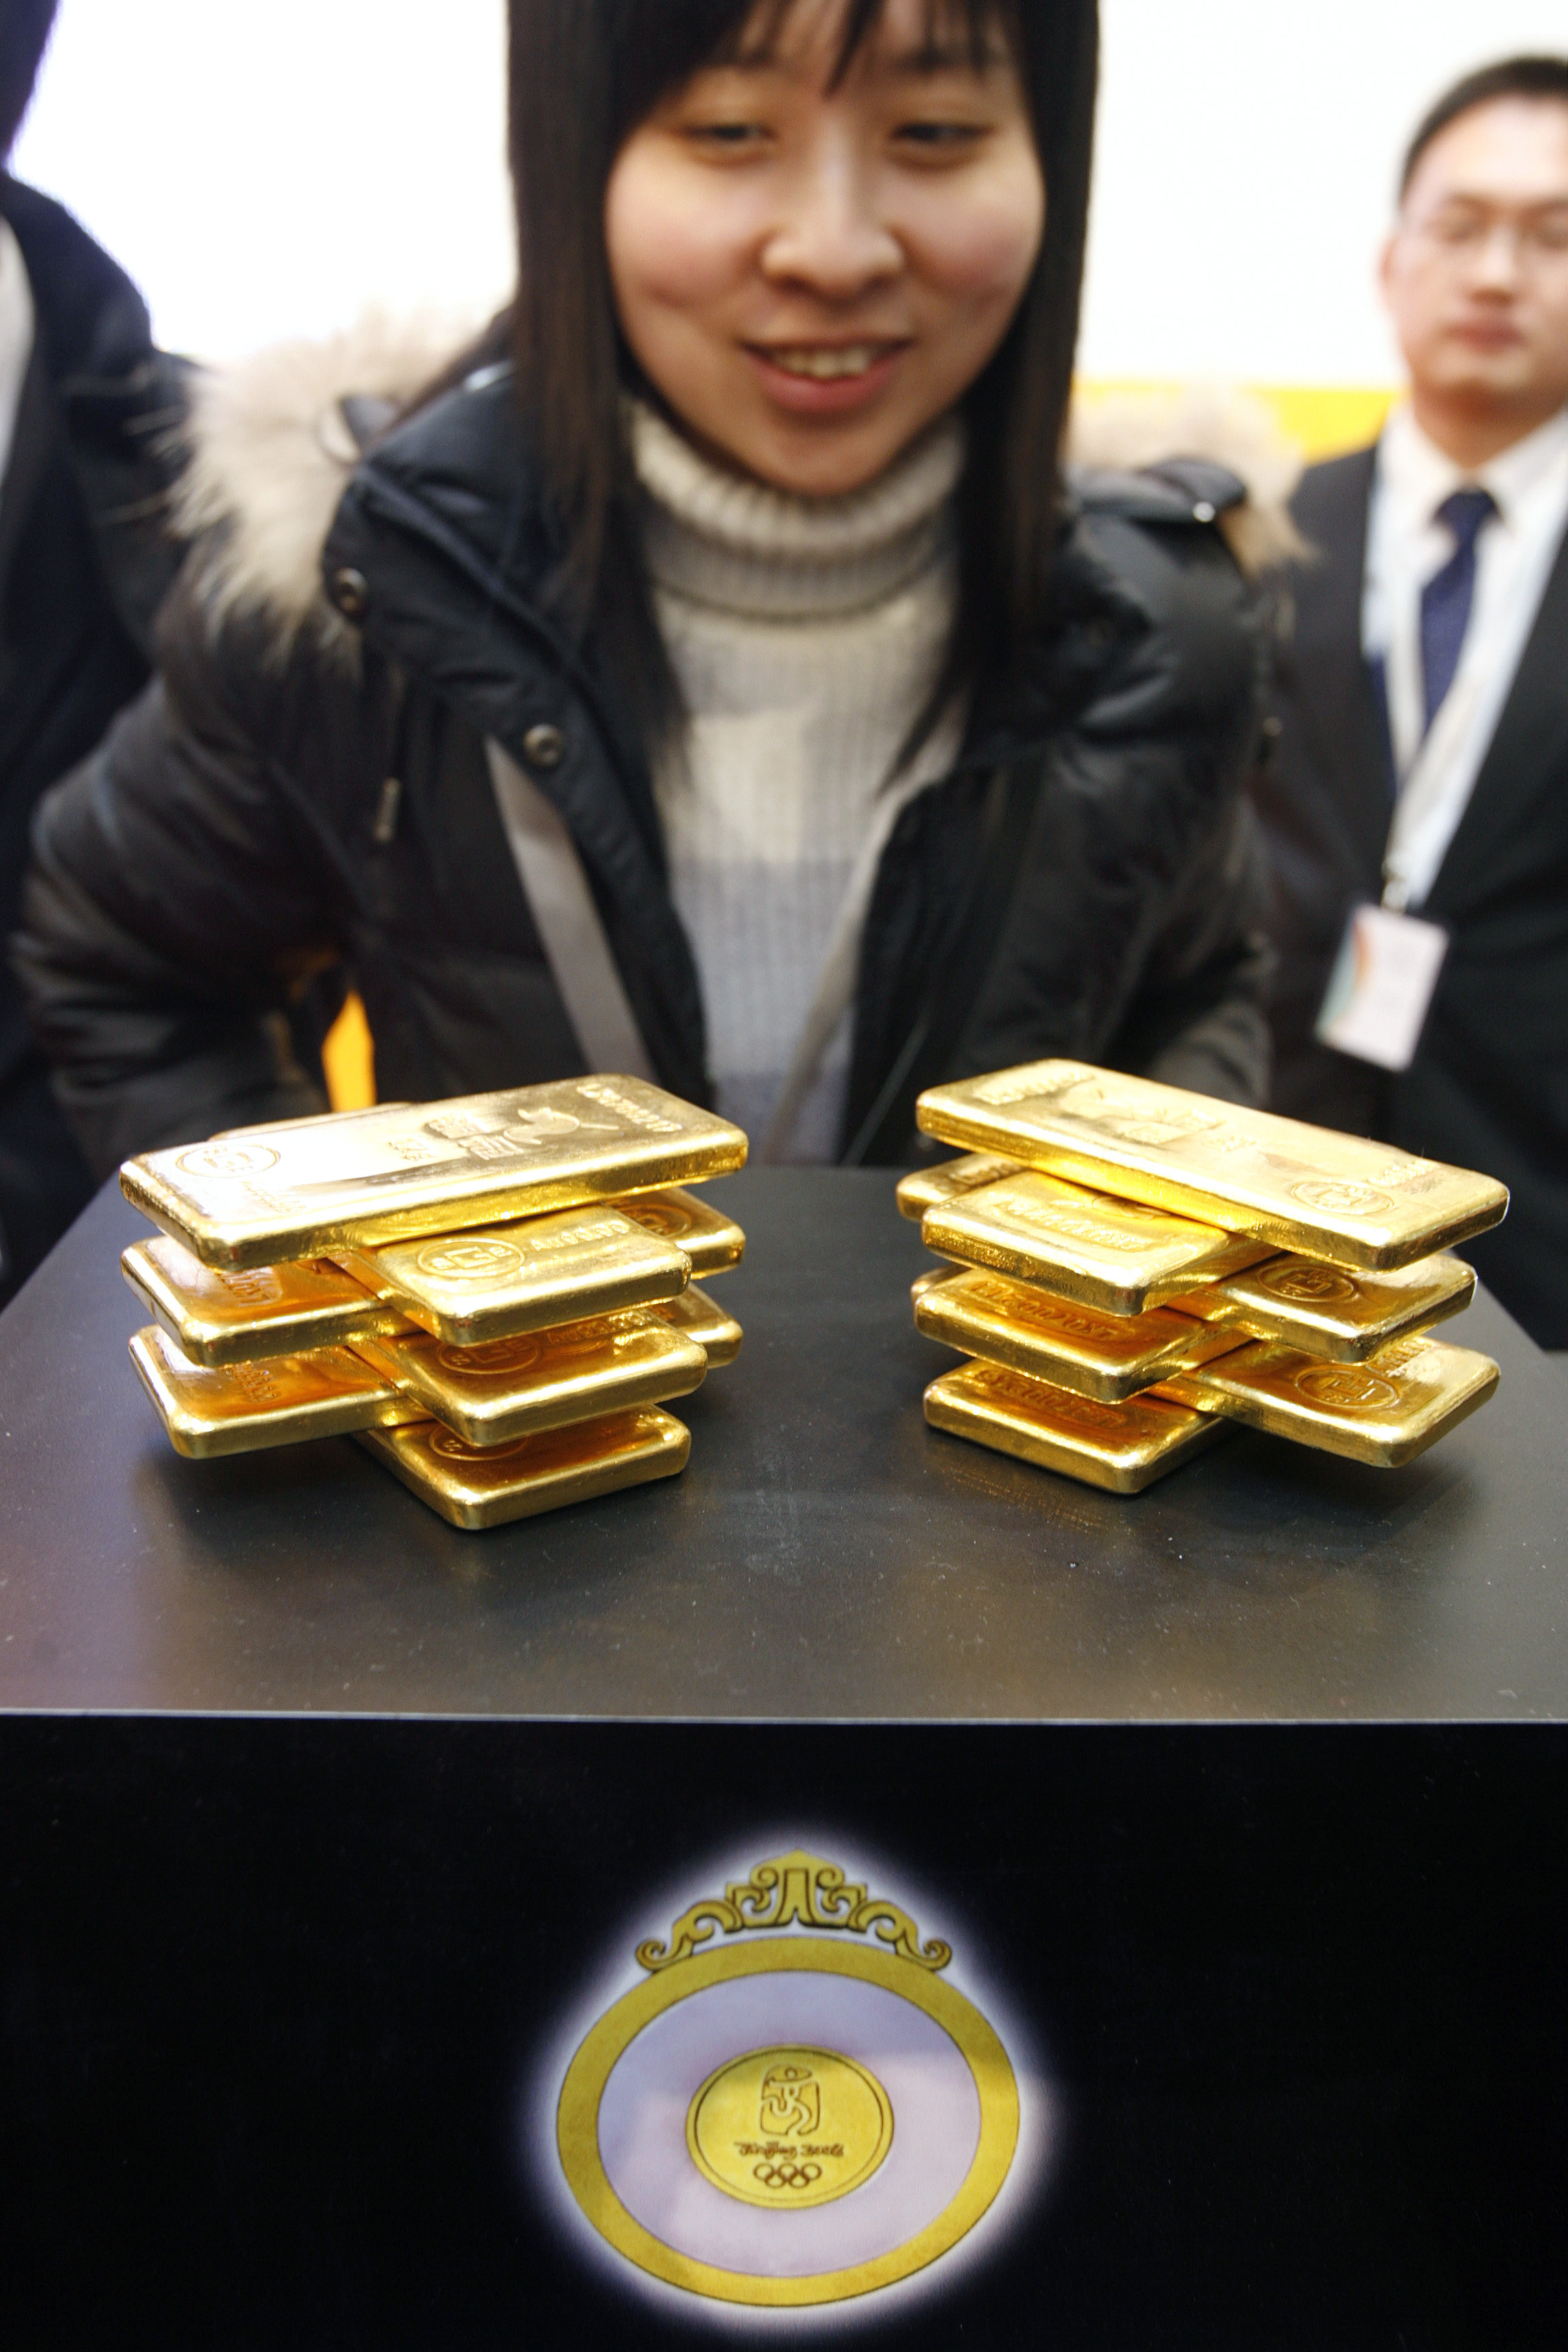 A woman looks at gold bars during a handover ceremony in Shanghai